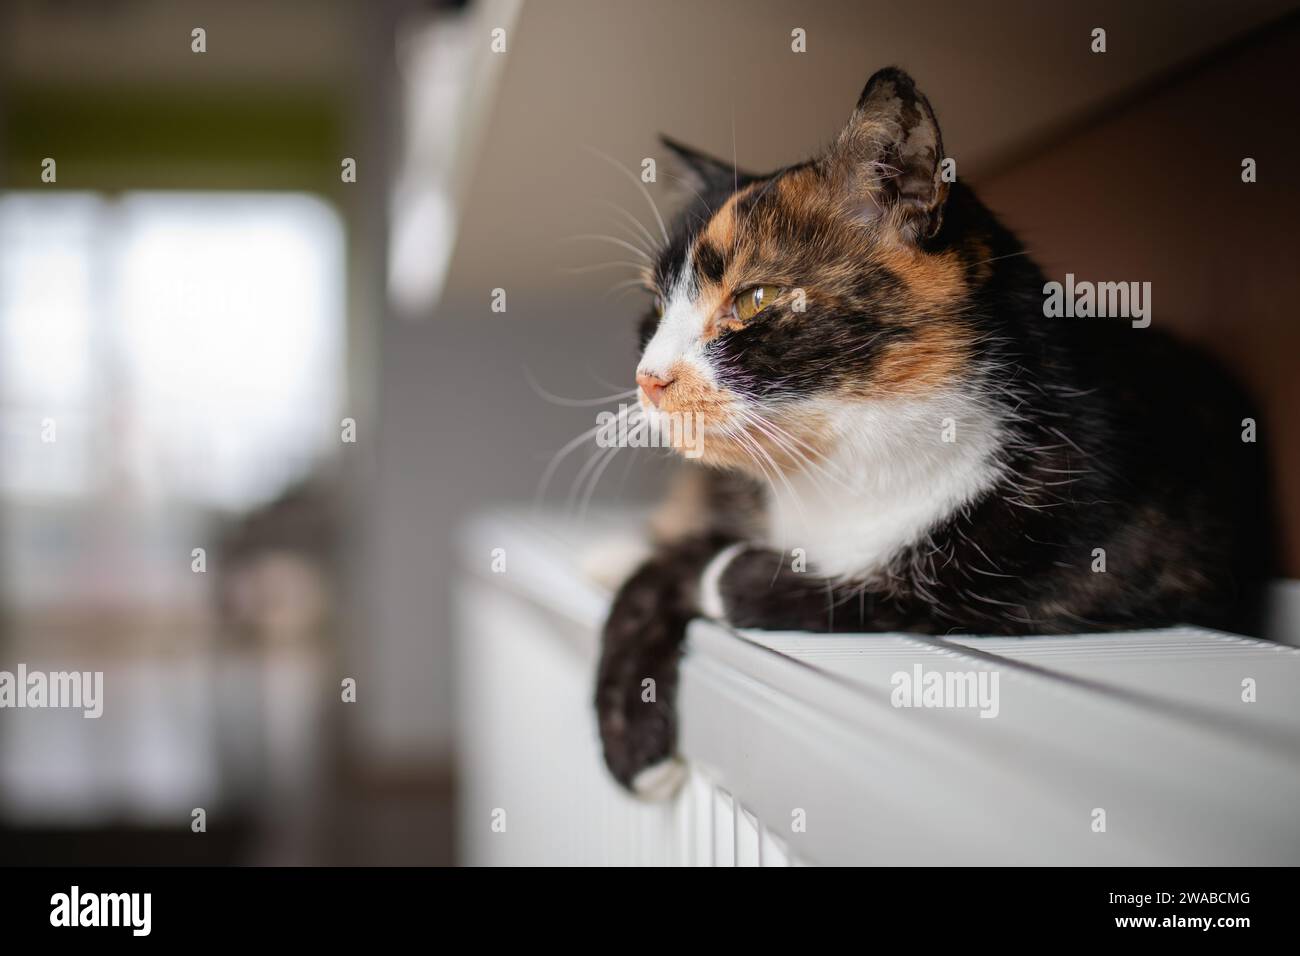 Domestic life with pet. Portrait of cute tabby cat while lying on heater at home. Stock Photo